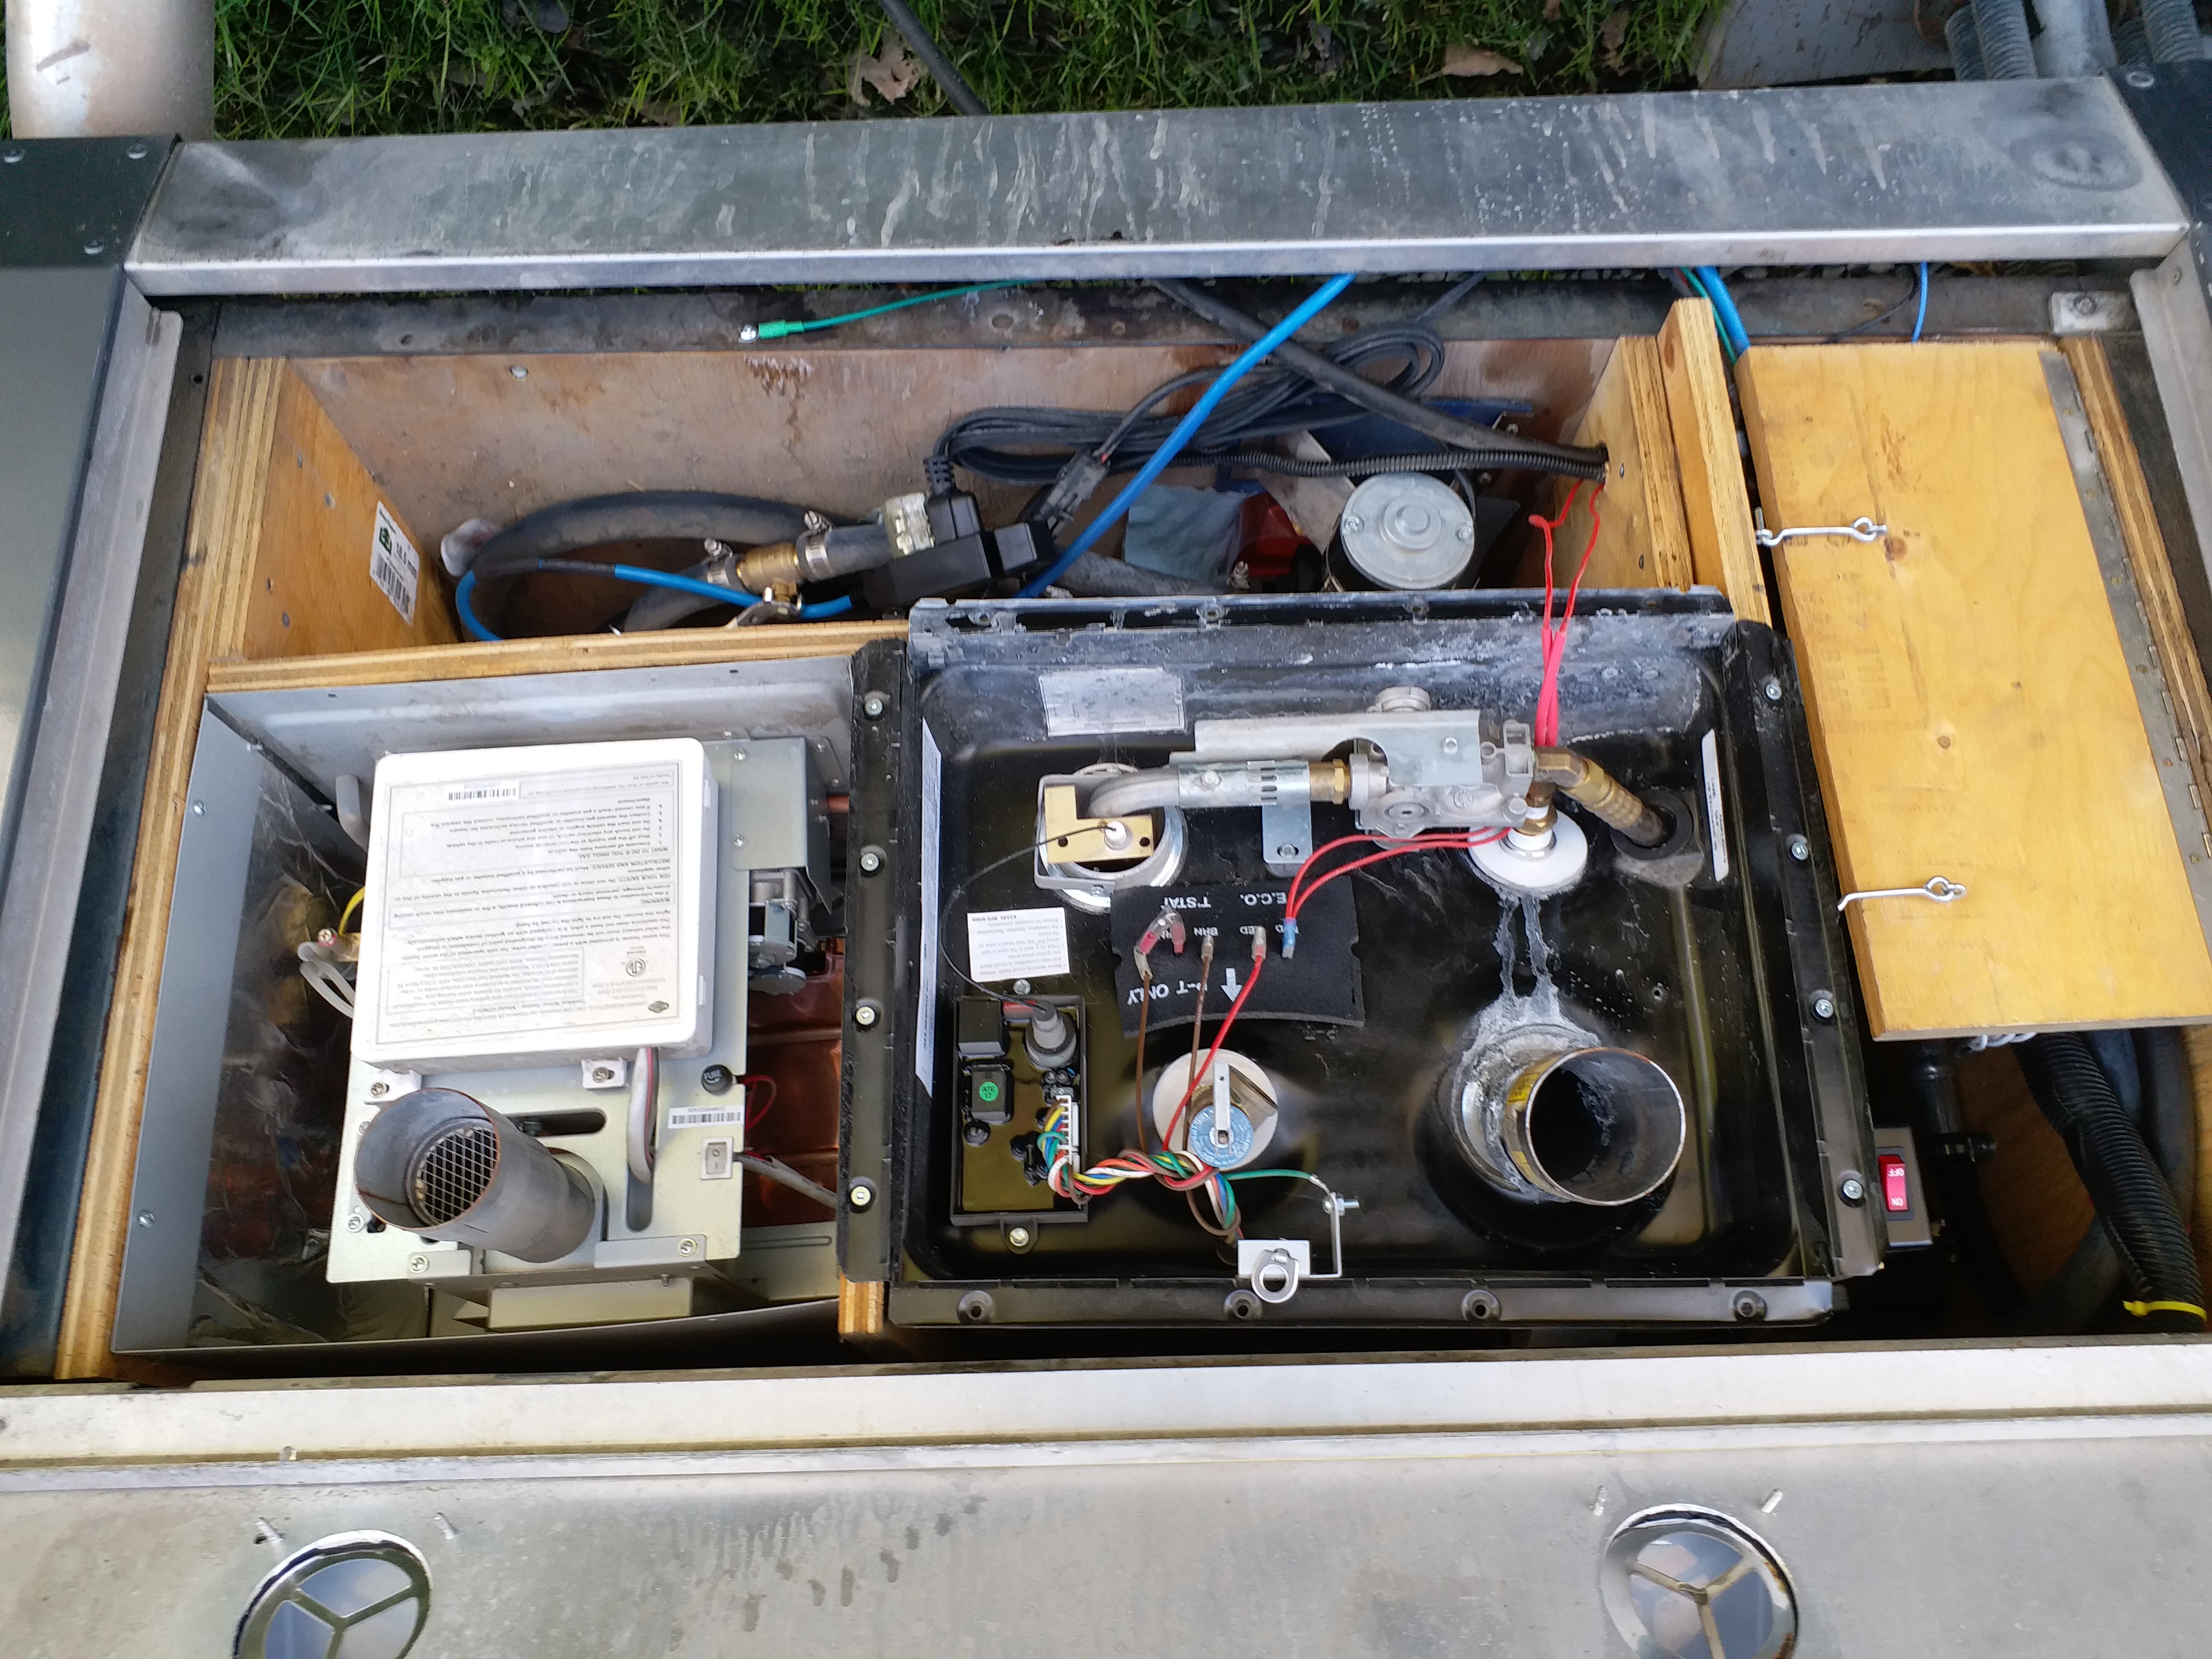 The full compartment where the AquaHot had been The compartment was lined with sheet metal and lined with cement board.  The Girard Tankless is on the right and the Atwood for the hydronic heating on the left.  At the extreme left is a plywood door covering the compartment where hoses and connections are found.